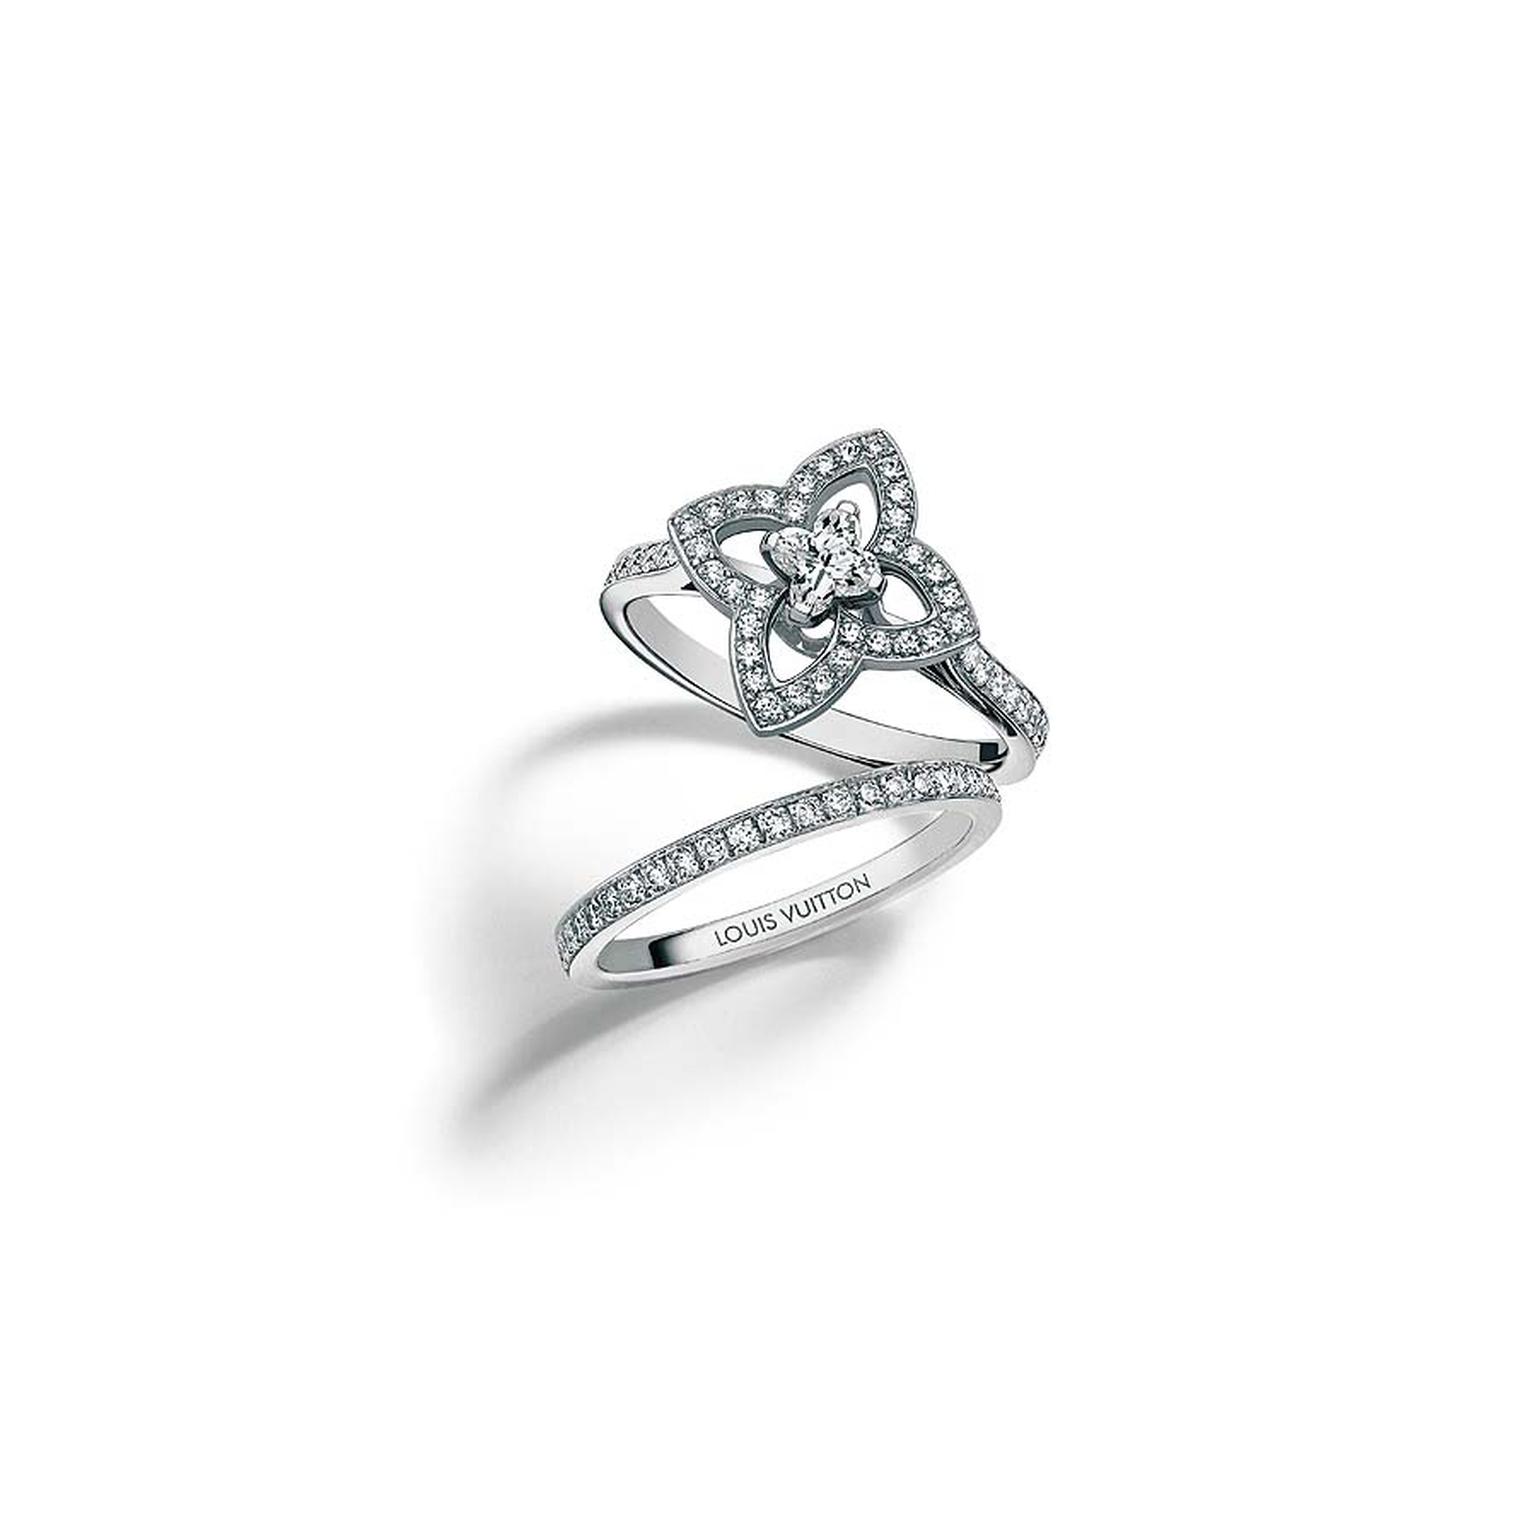 Louis Vuitton Eternite´ wedding band in white gold and diamonds and Les Ardentes solitaire engagement ring in white gold and diamonds, set with a Louis Vuitton Flower Cut diamond